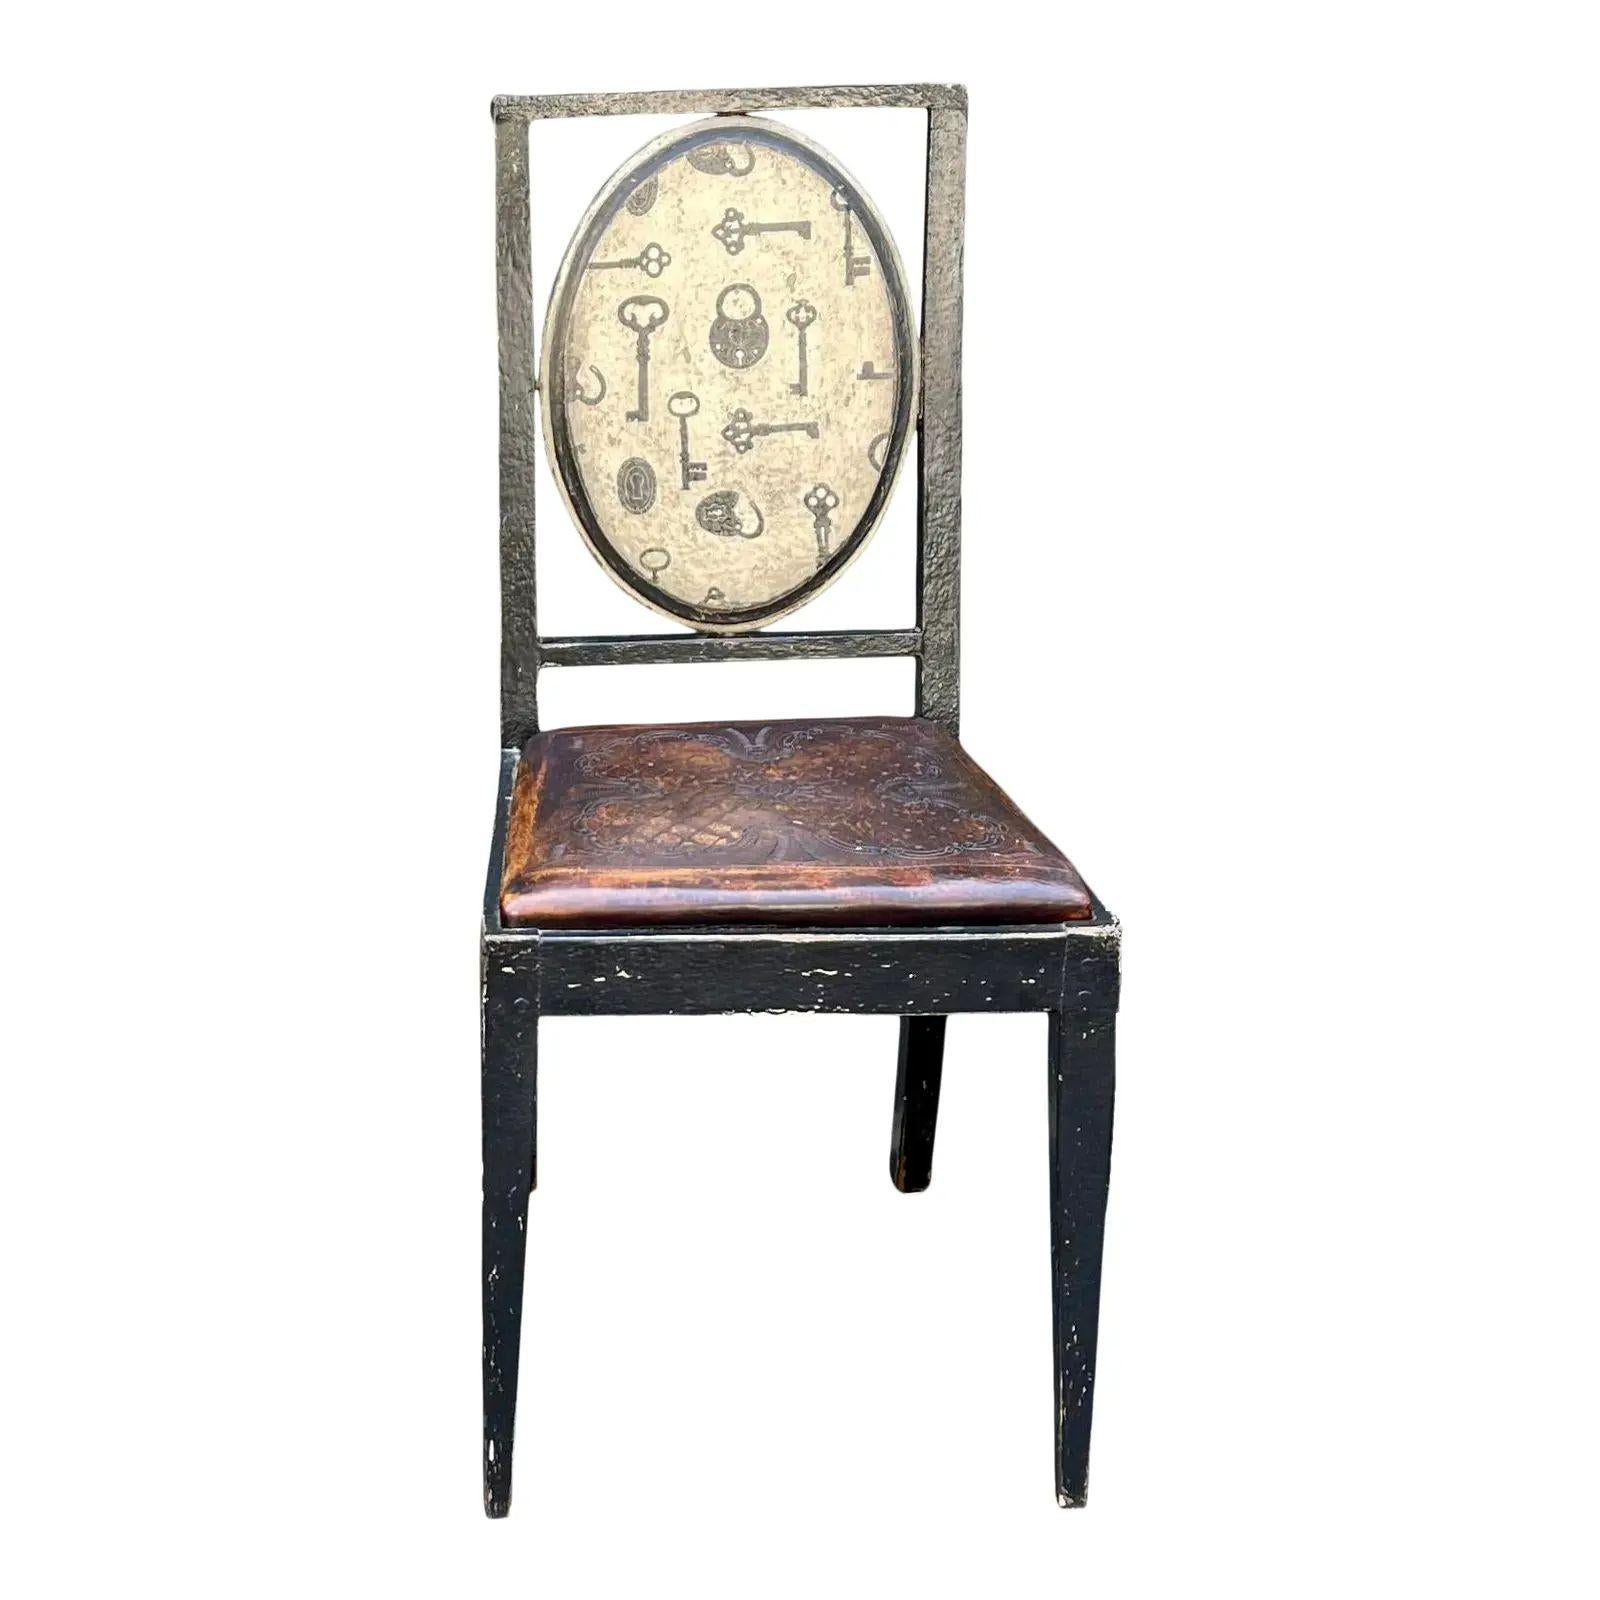 Equator Furniture Company Rustic Tooled Leather Painted Chair
Priced Each

Additional information: 
Materials: Leather, Paint, Wood
Color: Black
Period: 1990s
Styles: Rustic, Spanish Colonial
Number of Seats: 1
Item Type: Vintage, Antique